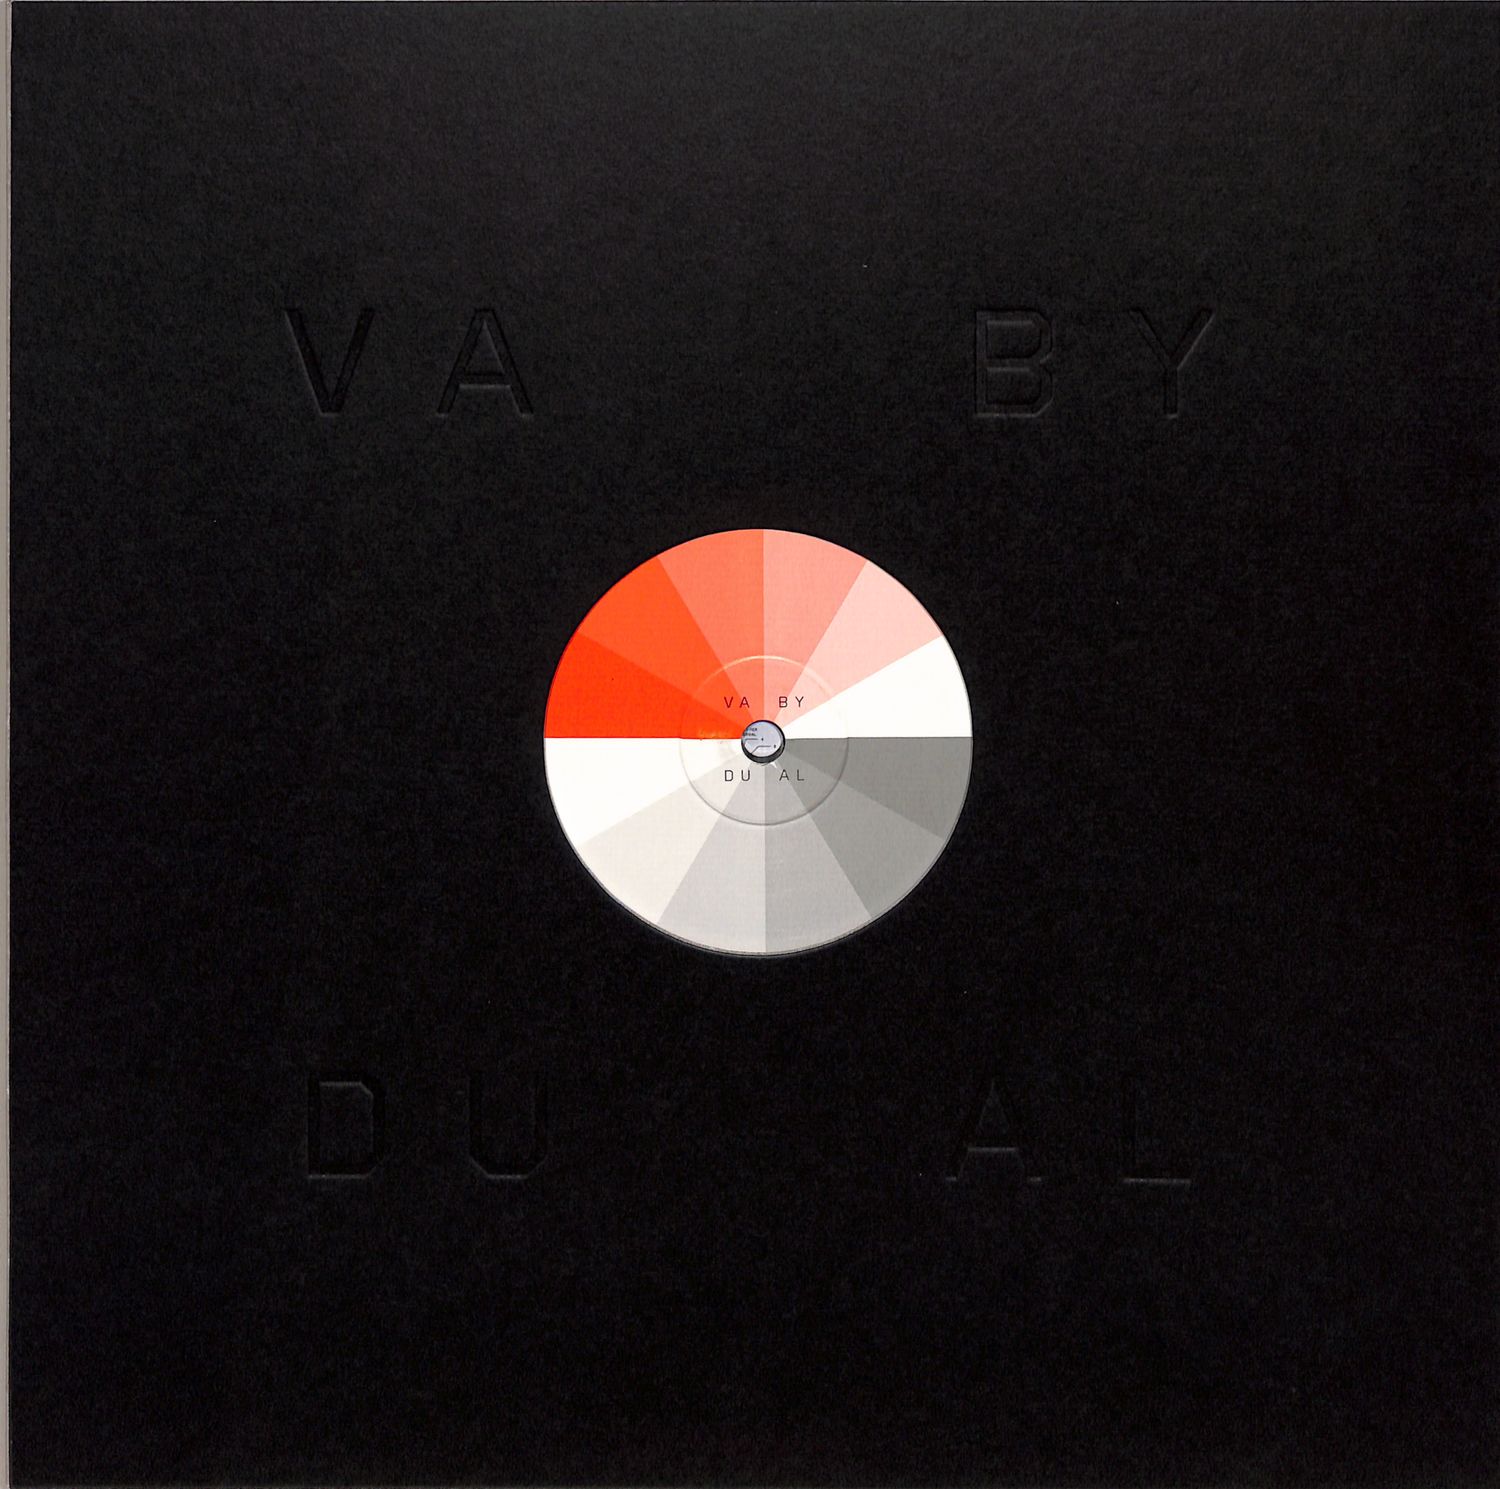 VAxBY - DUAL 